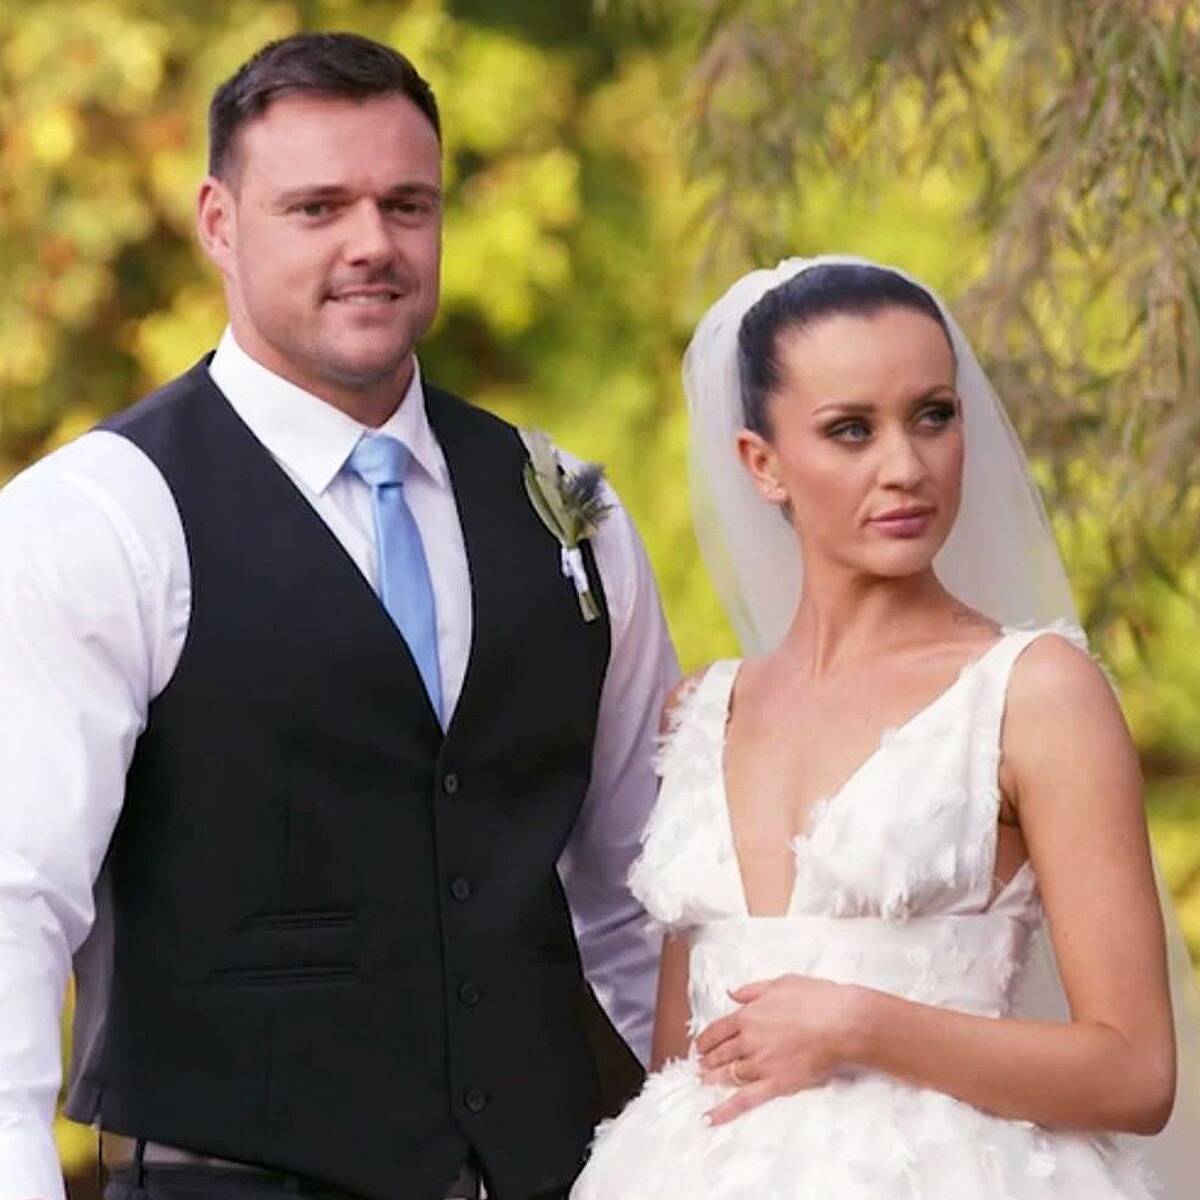 Married At First Sight Australia Couples- Where Are They Now? - Married At First Sight 2021 Where Are They Now